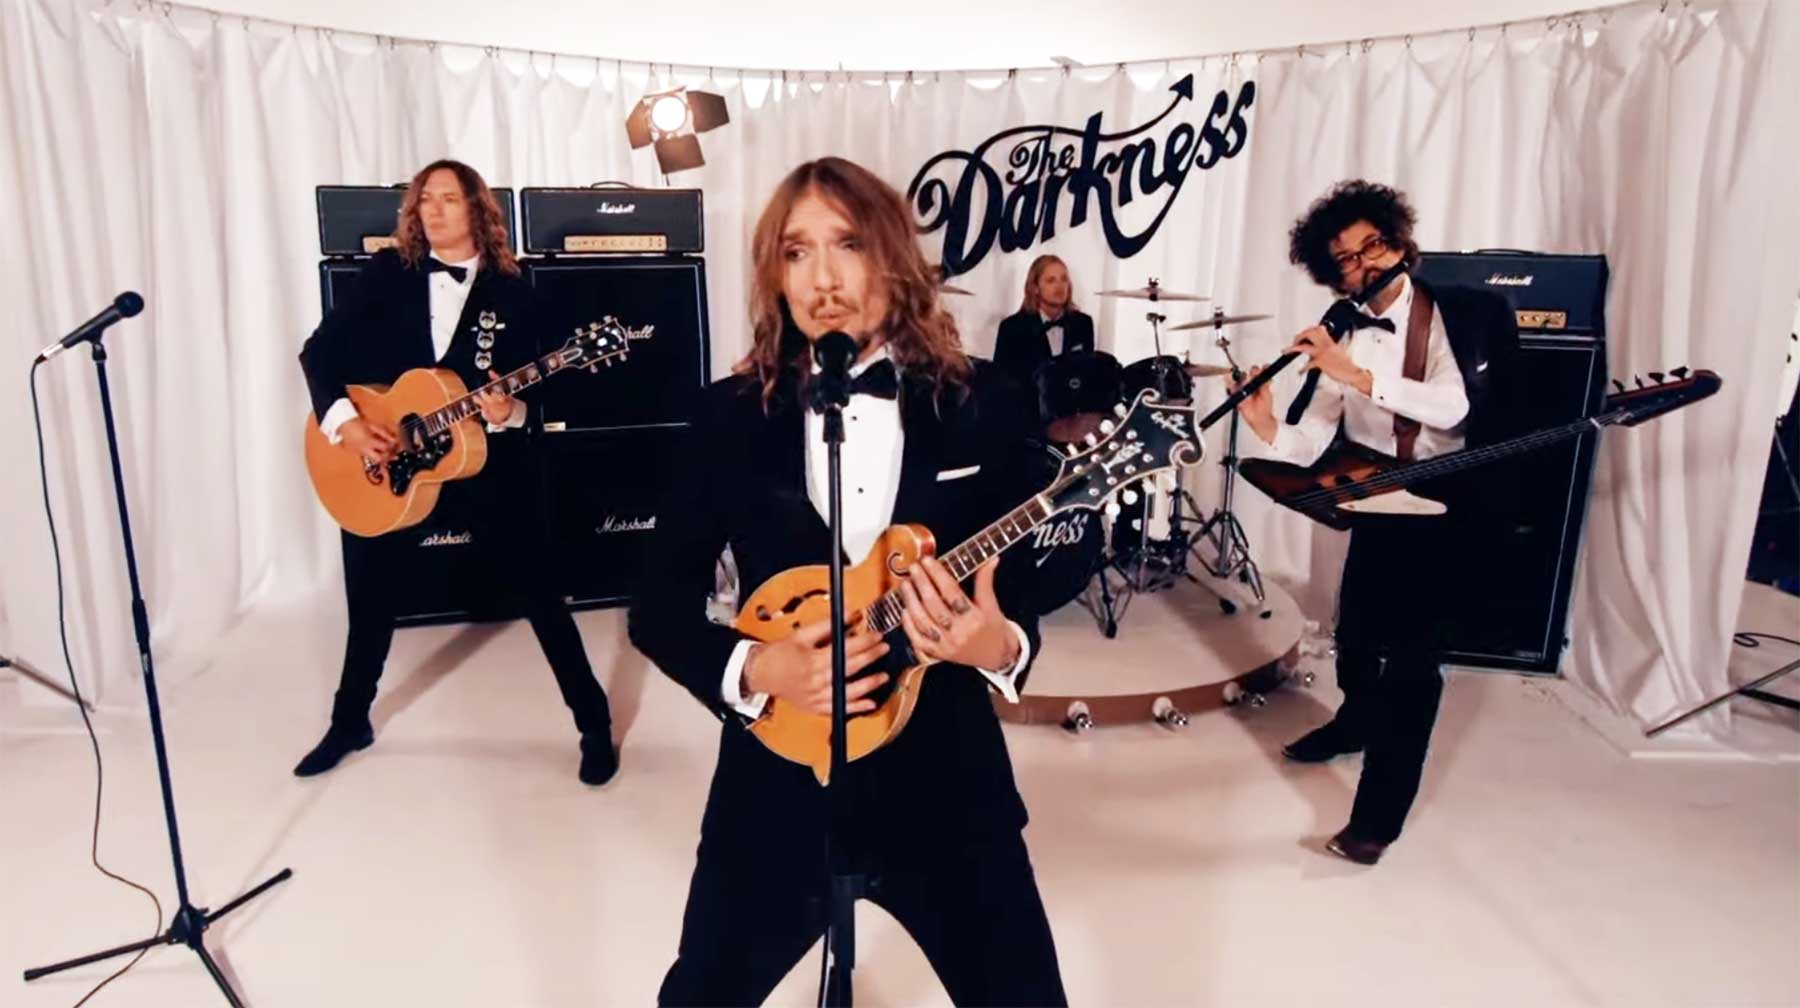 The Darkness - Rock and Roll Deserves to Die The-Darkness-Rock-and-Roll-deserves-to-die-musikvideo 